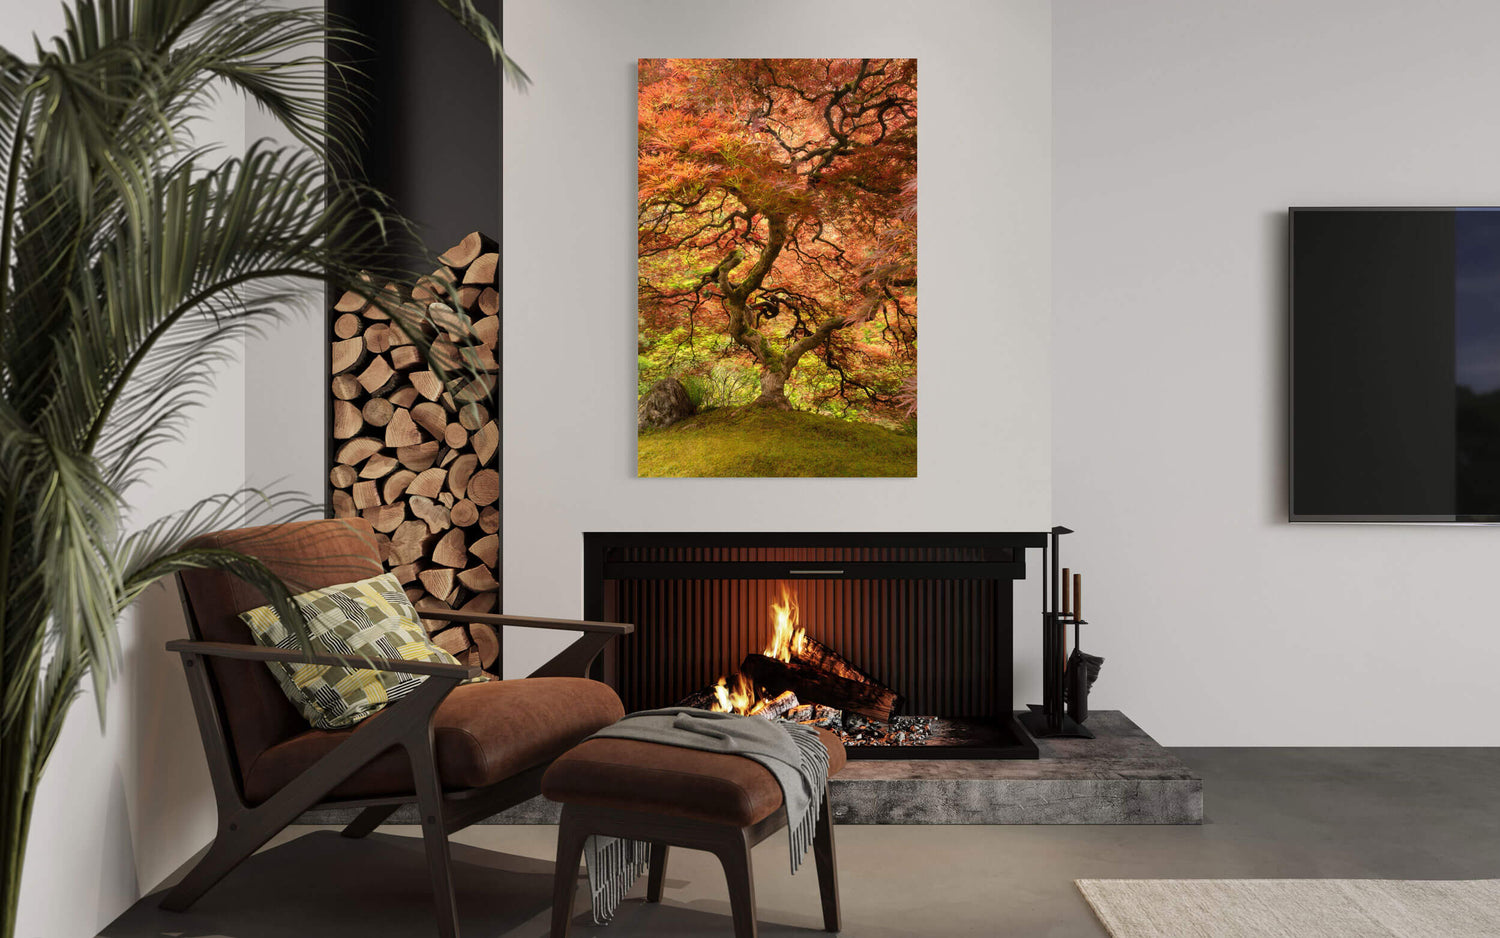 A piece of Japanese Garden art showing a maple tree hangs in a living room.